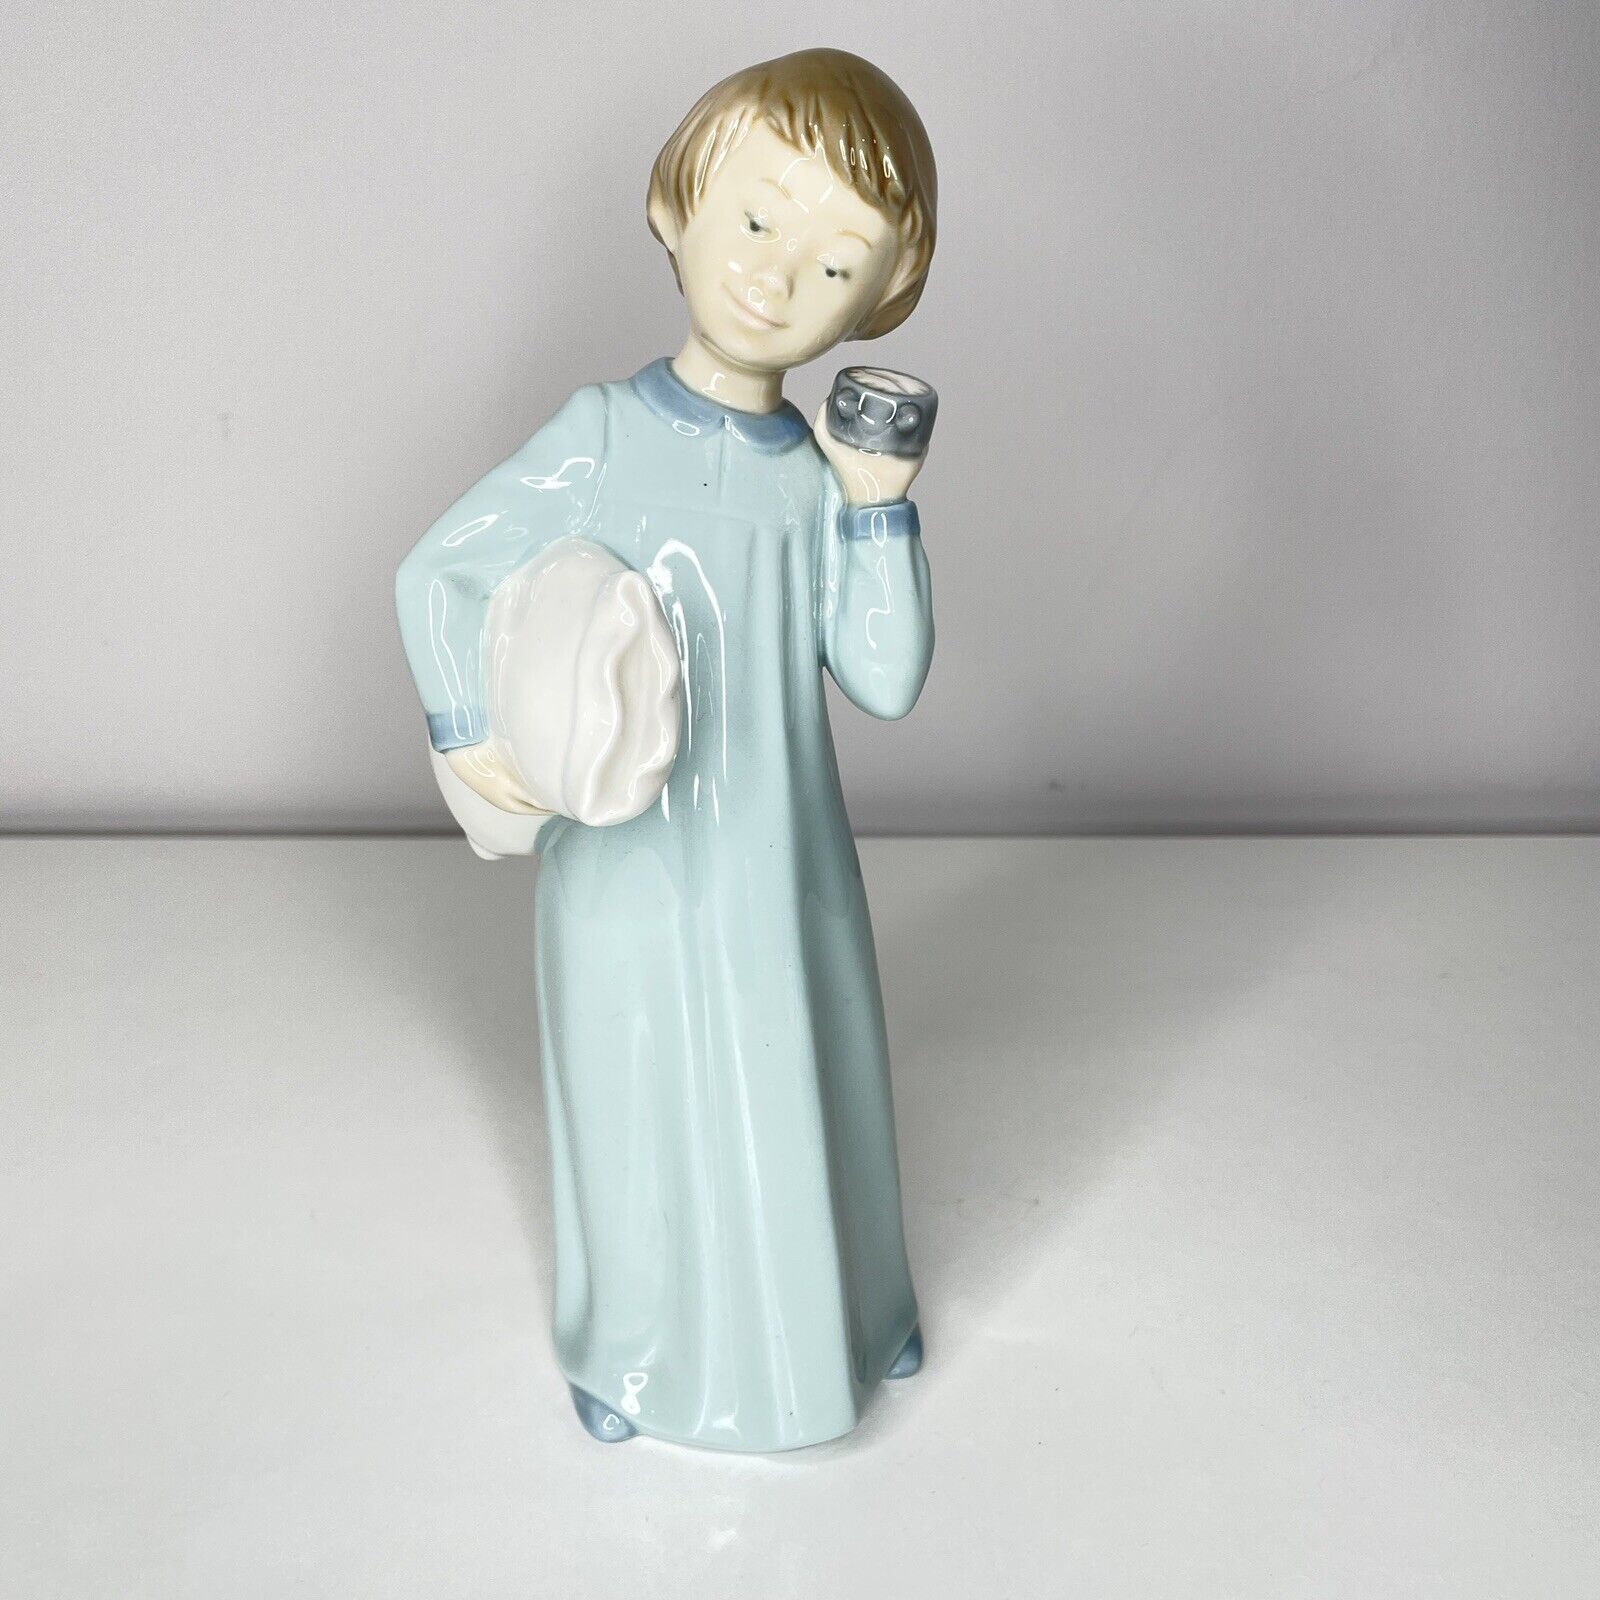 Nao by Lladro figurine, Girl Ready for Bed made in Spain, collectible